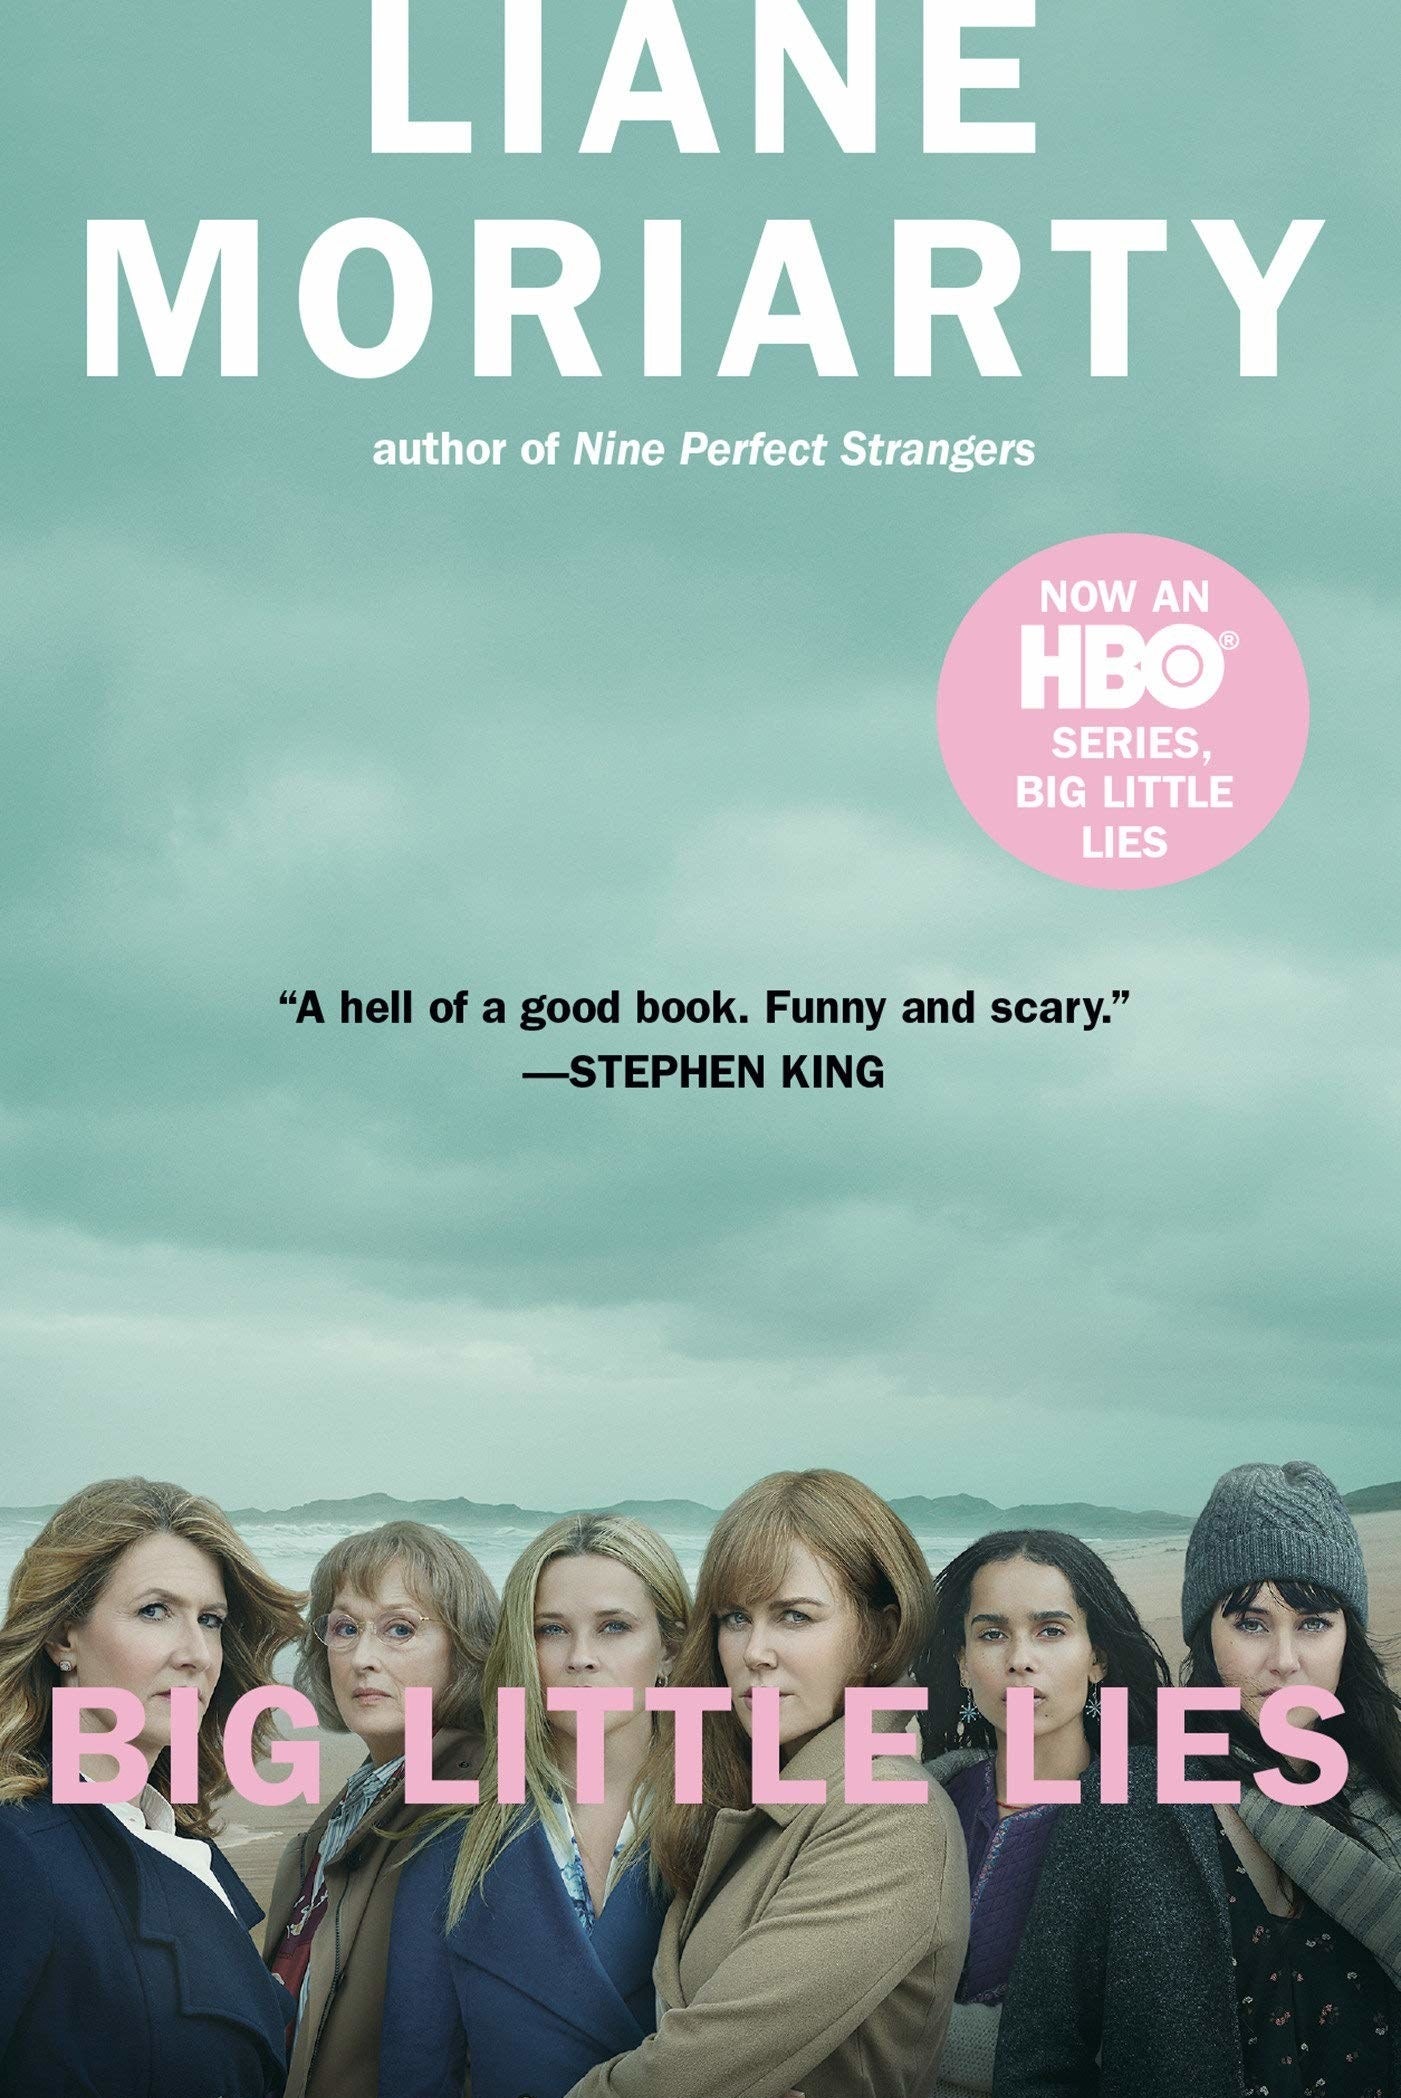 The cover of the book featuring the TV adaptations cast, including Zoe Kravitz, Reese Witherspoon, Nicole Kidman, and Laura Derne